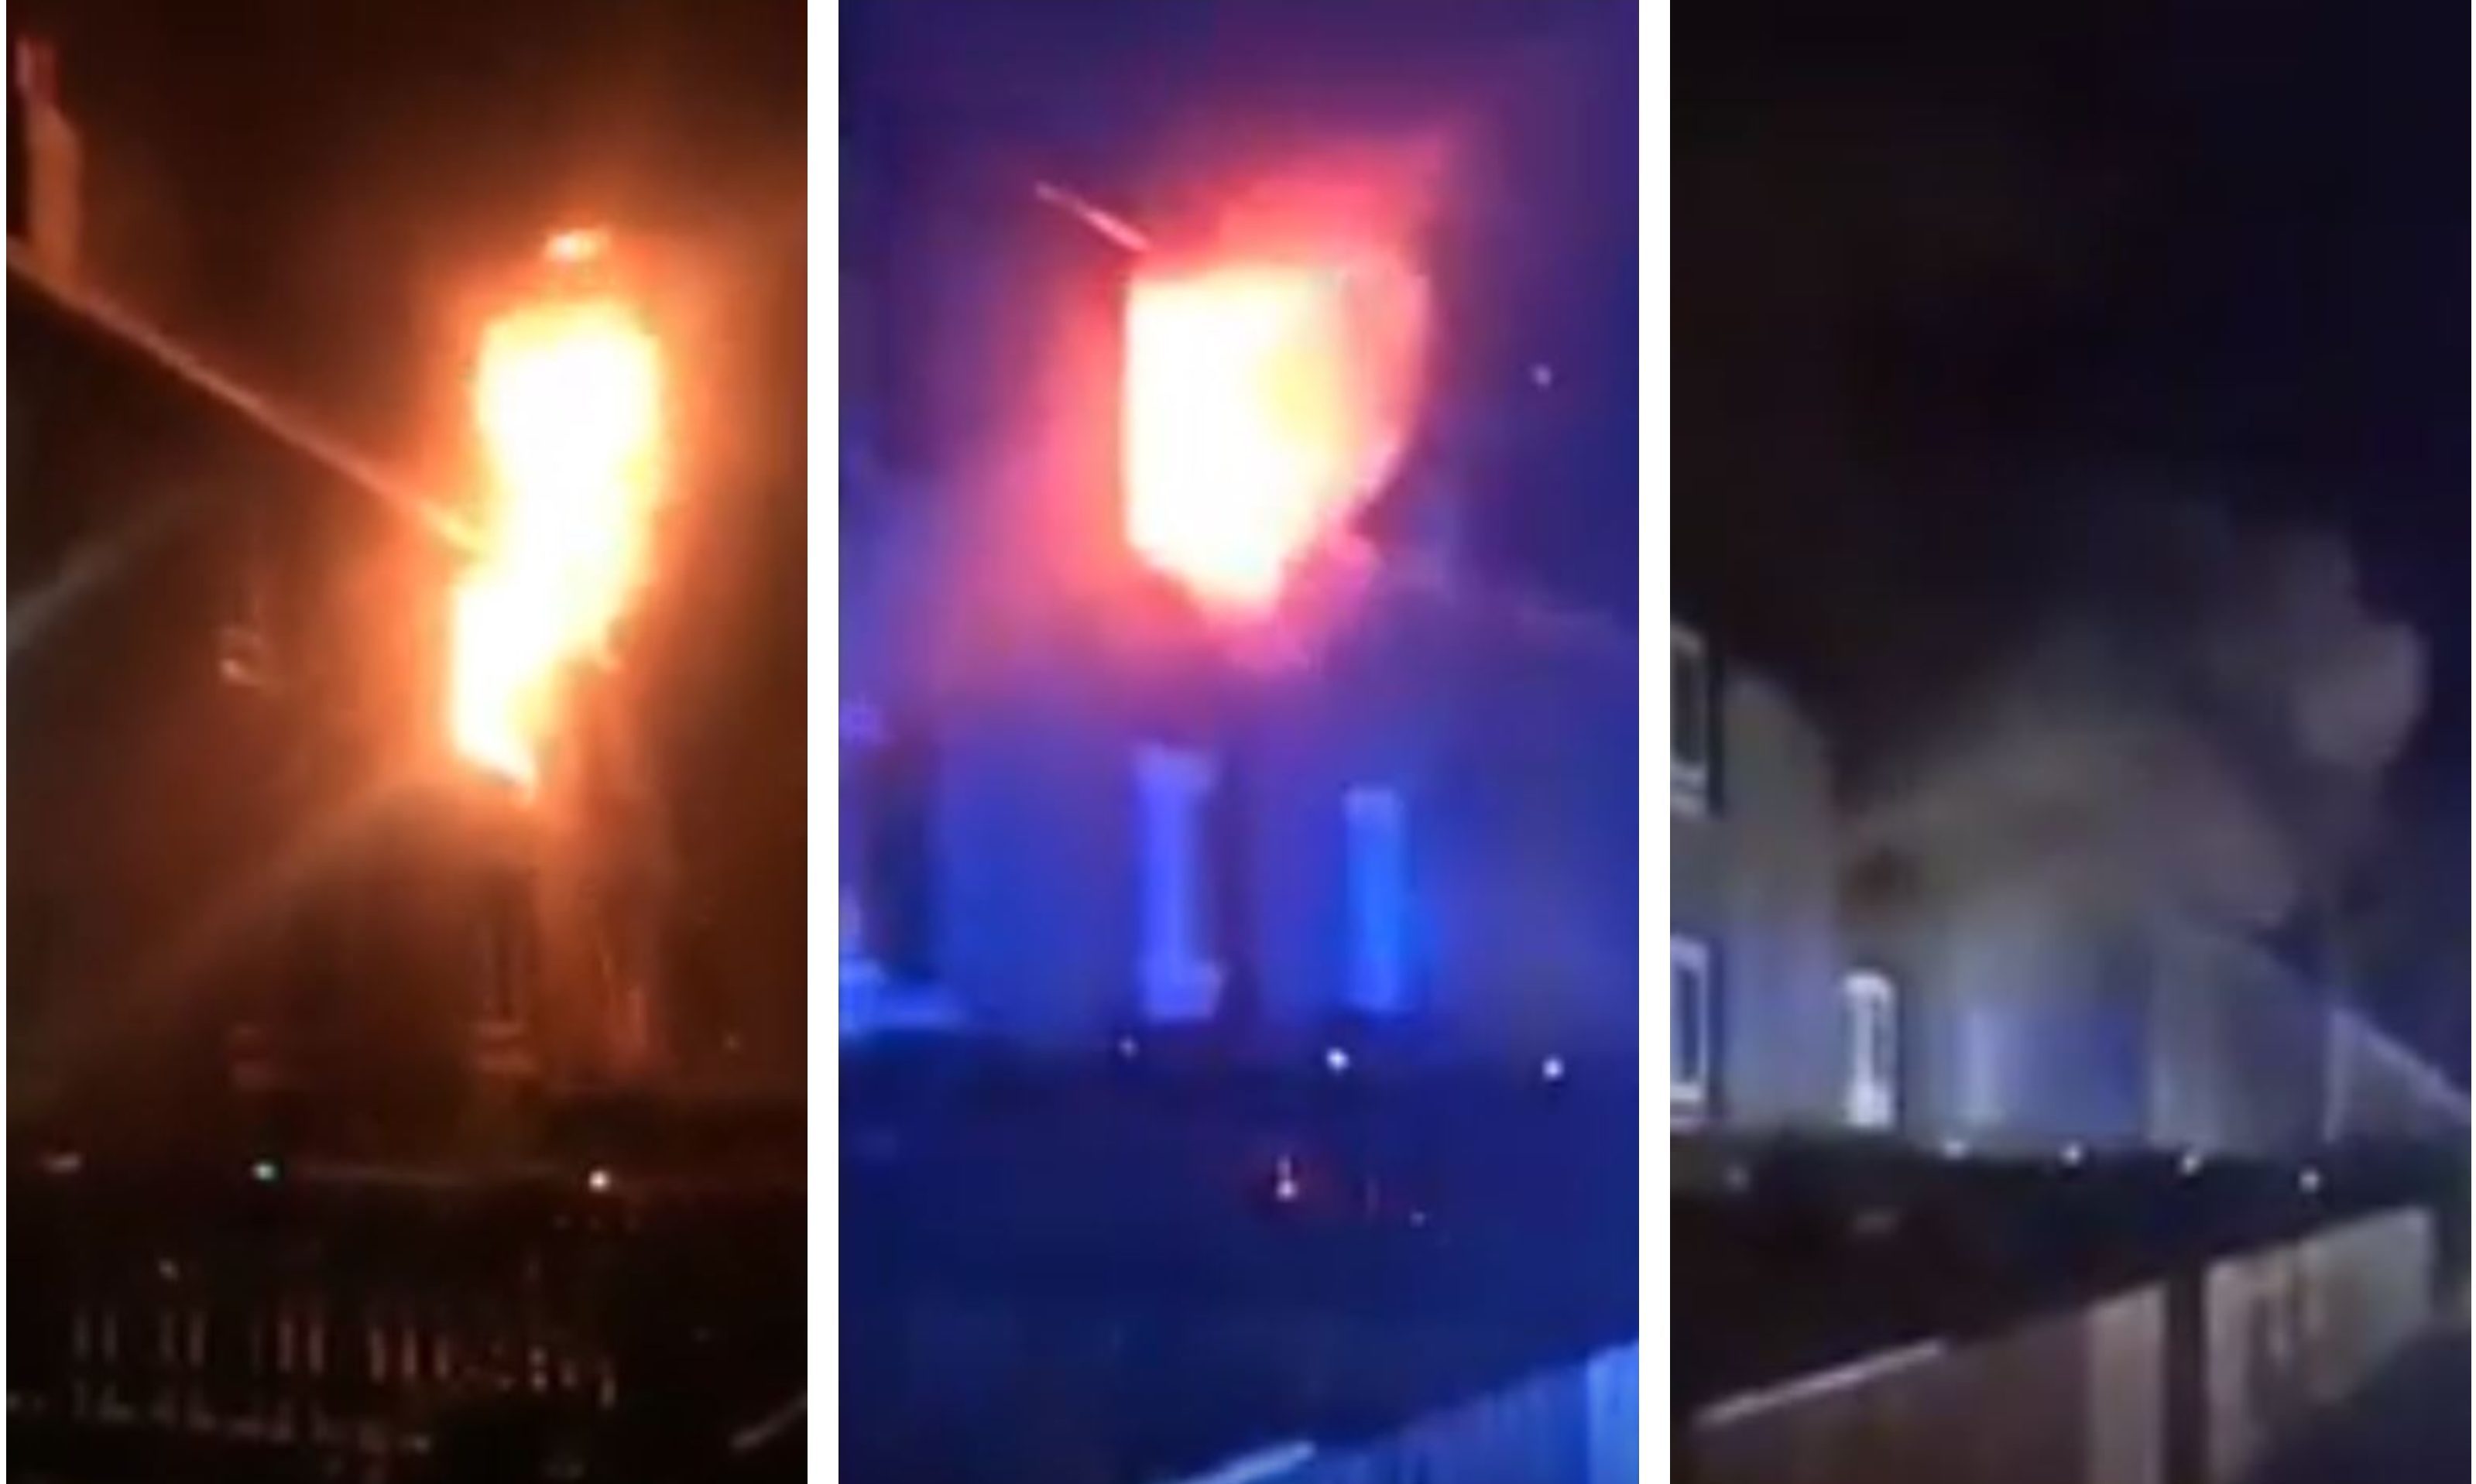 Screen grabs from a video of the Buckhaven flat fire.